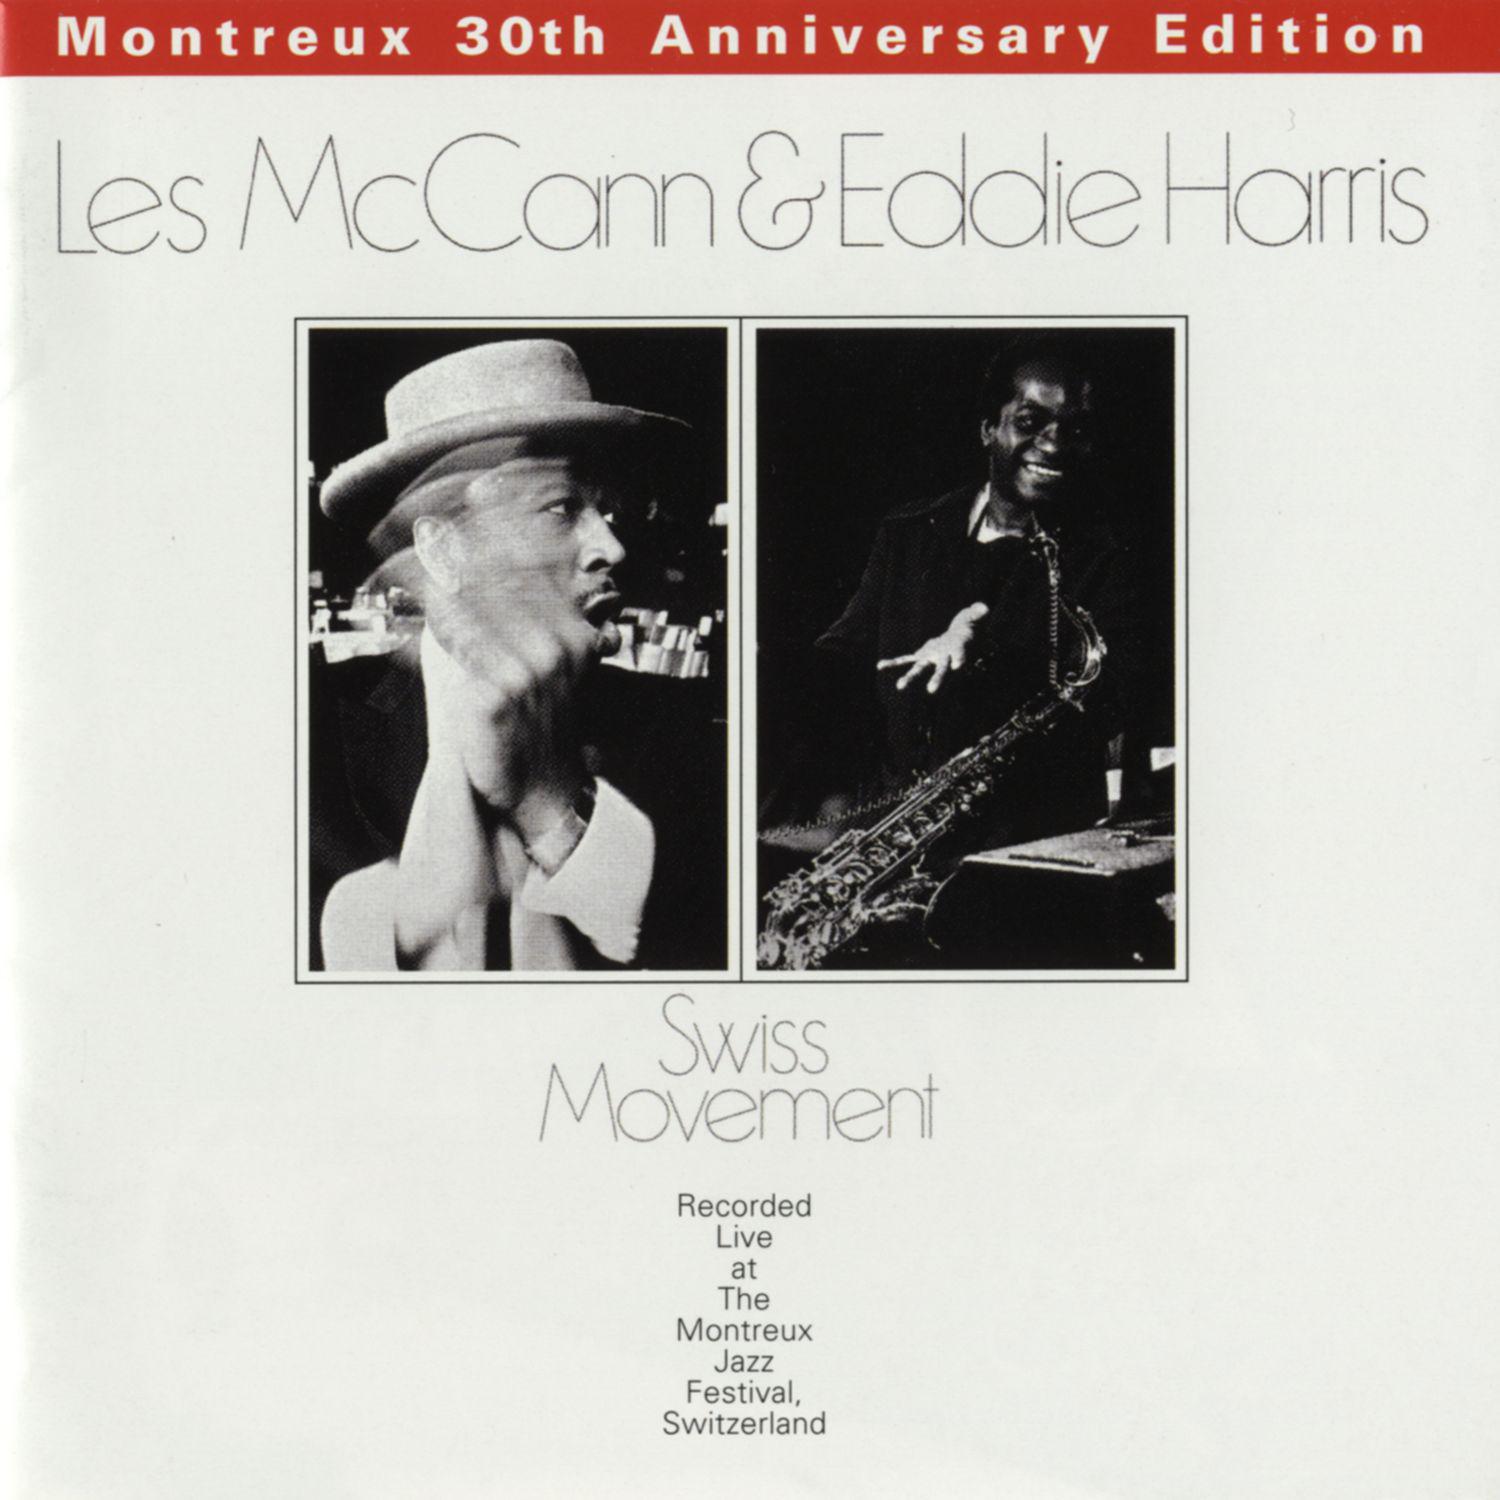 Swiss Movement (Montreux 30th Anniversary)